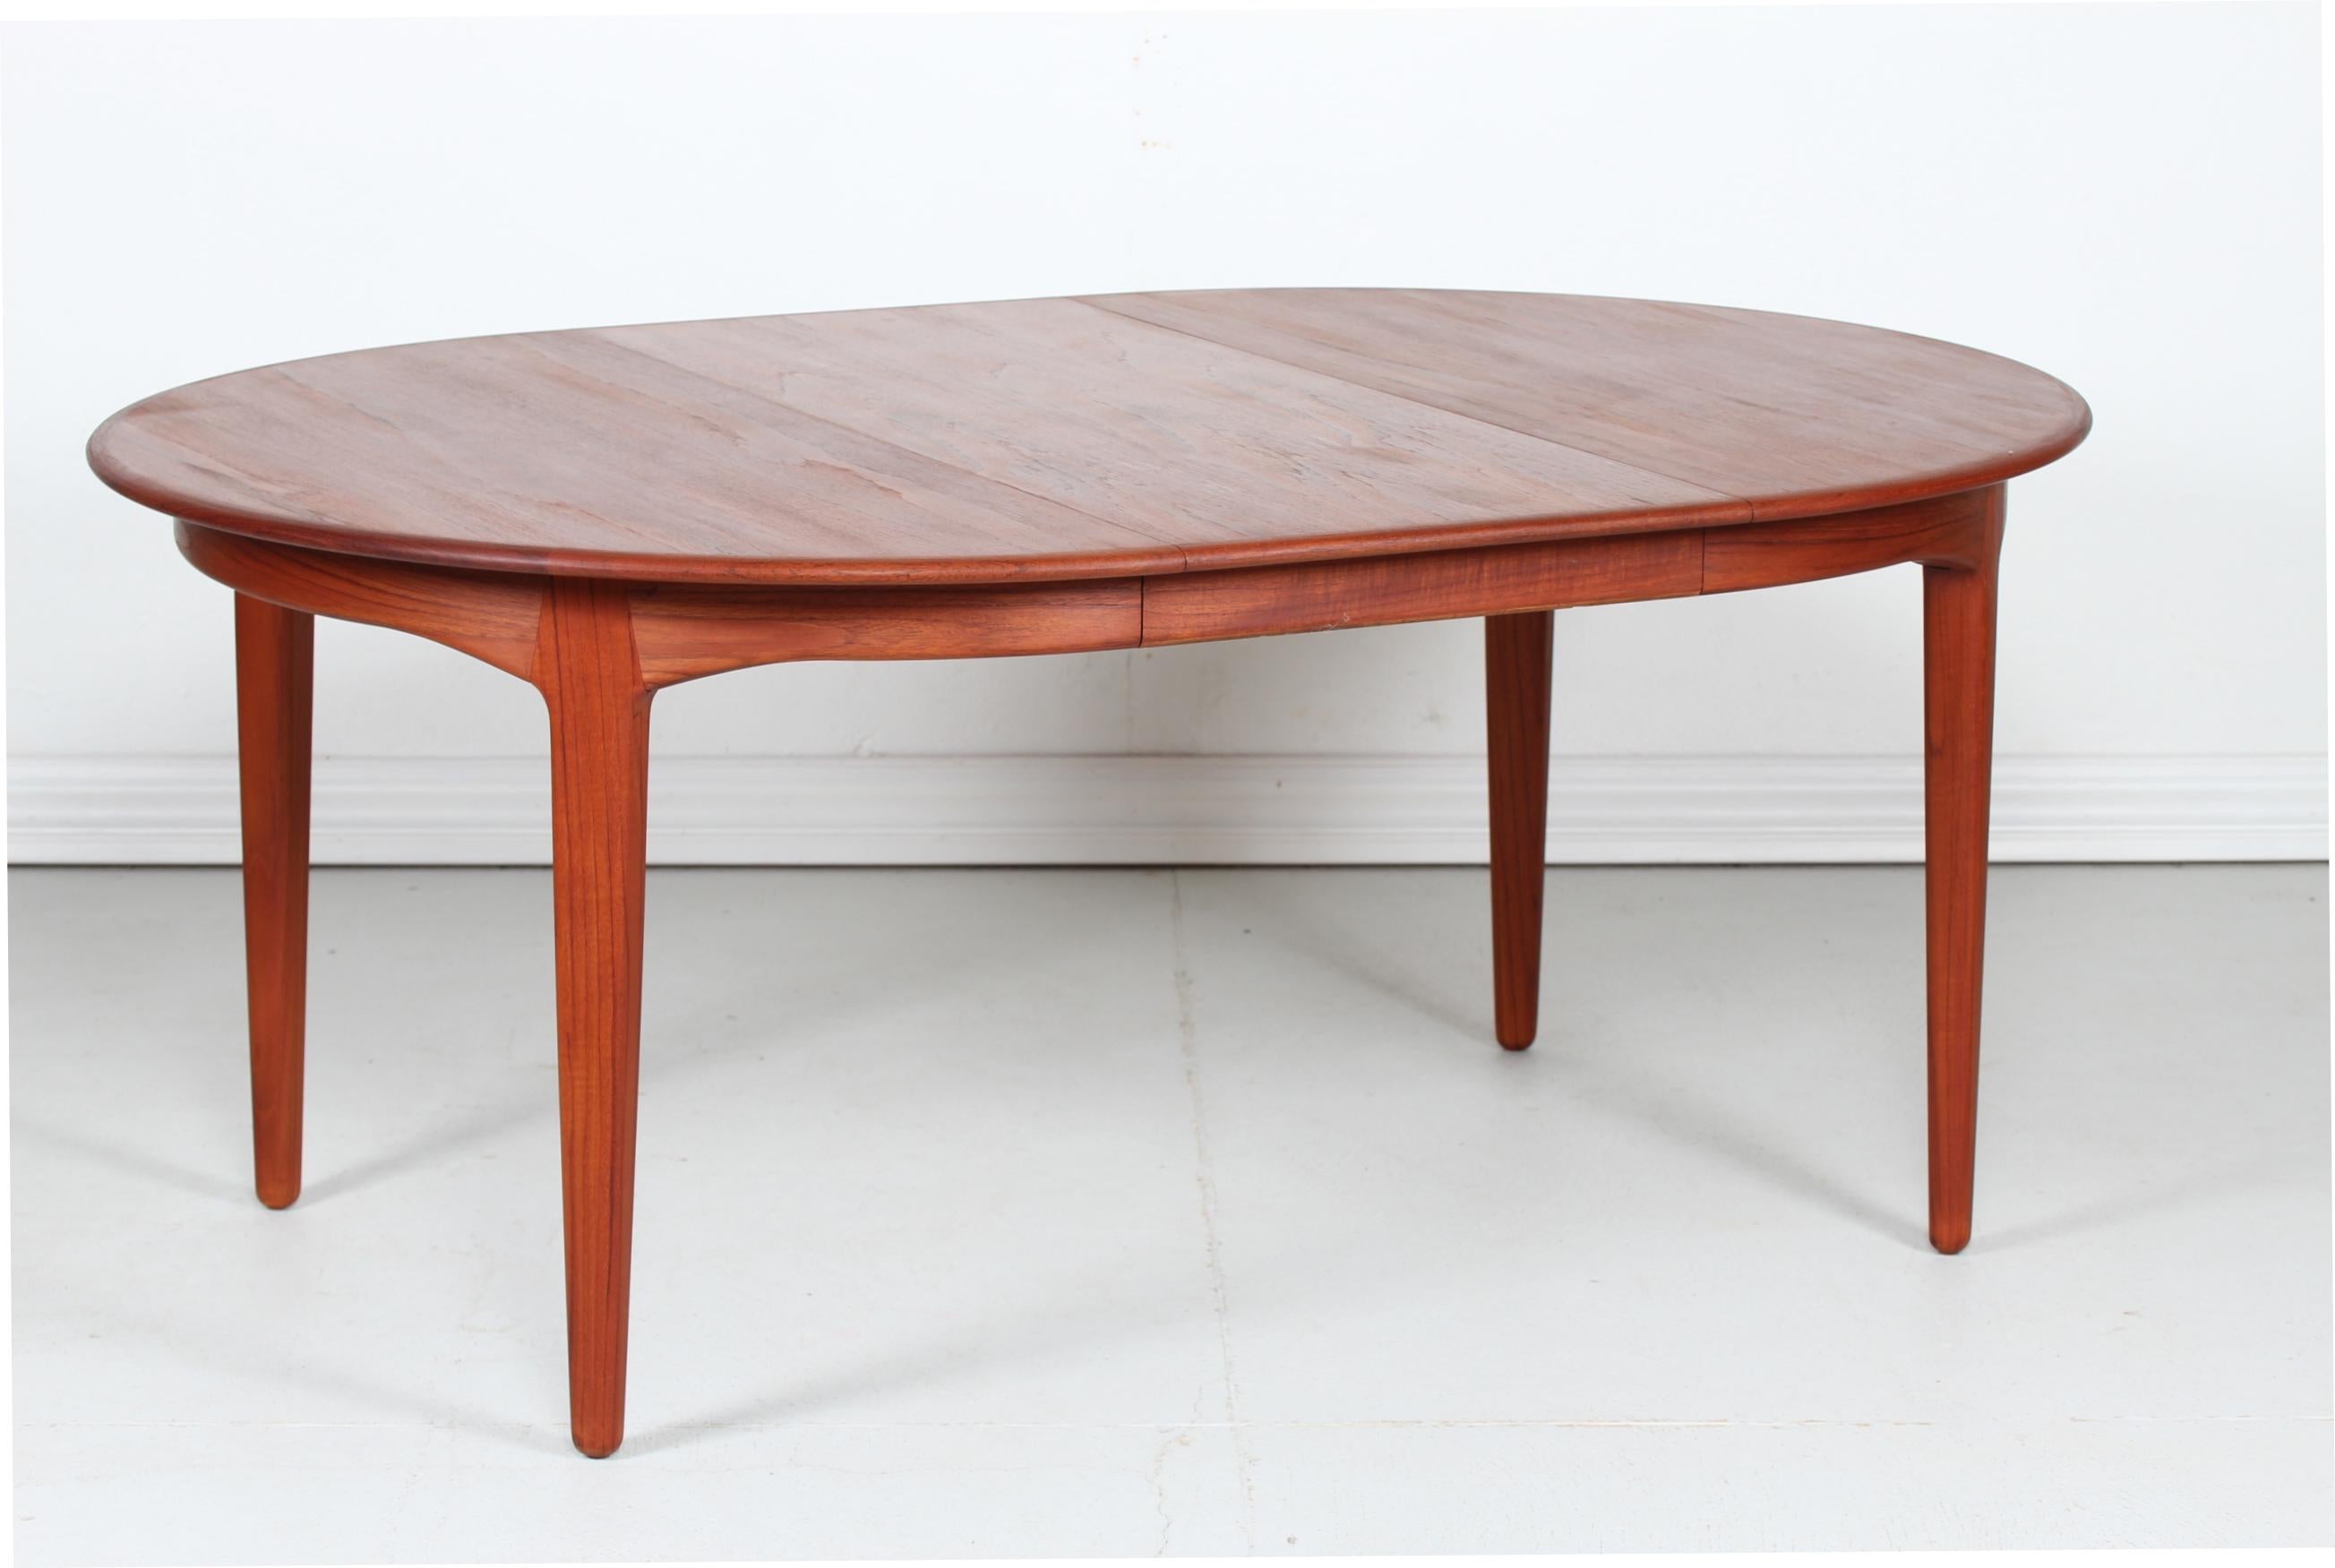 Danish vintage Henning Kjærnulf large round dining table model 62 manufactured by Sorø Stolefabrik, Denmark

The table is made of solid teak and teak veneer and can be extended by 4 extra leaves. One of the leaves has a frame underneath. If the